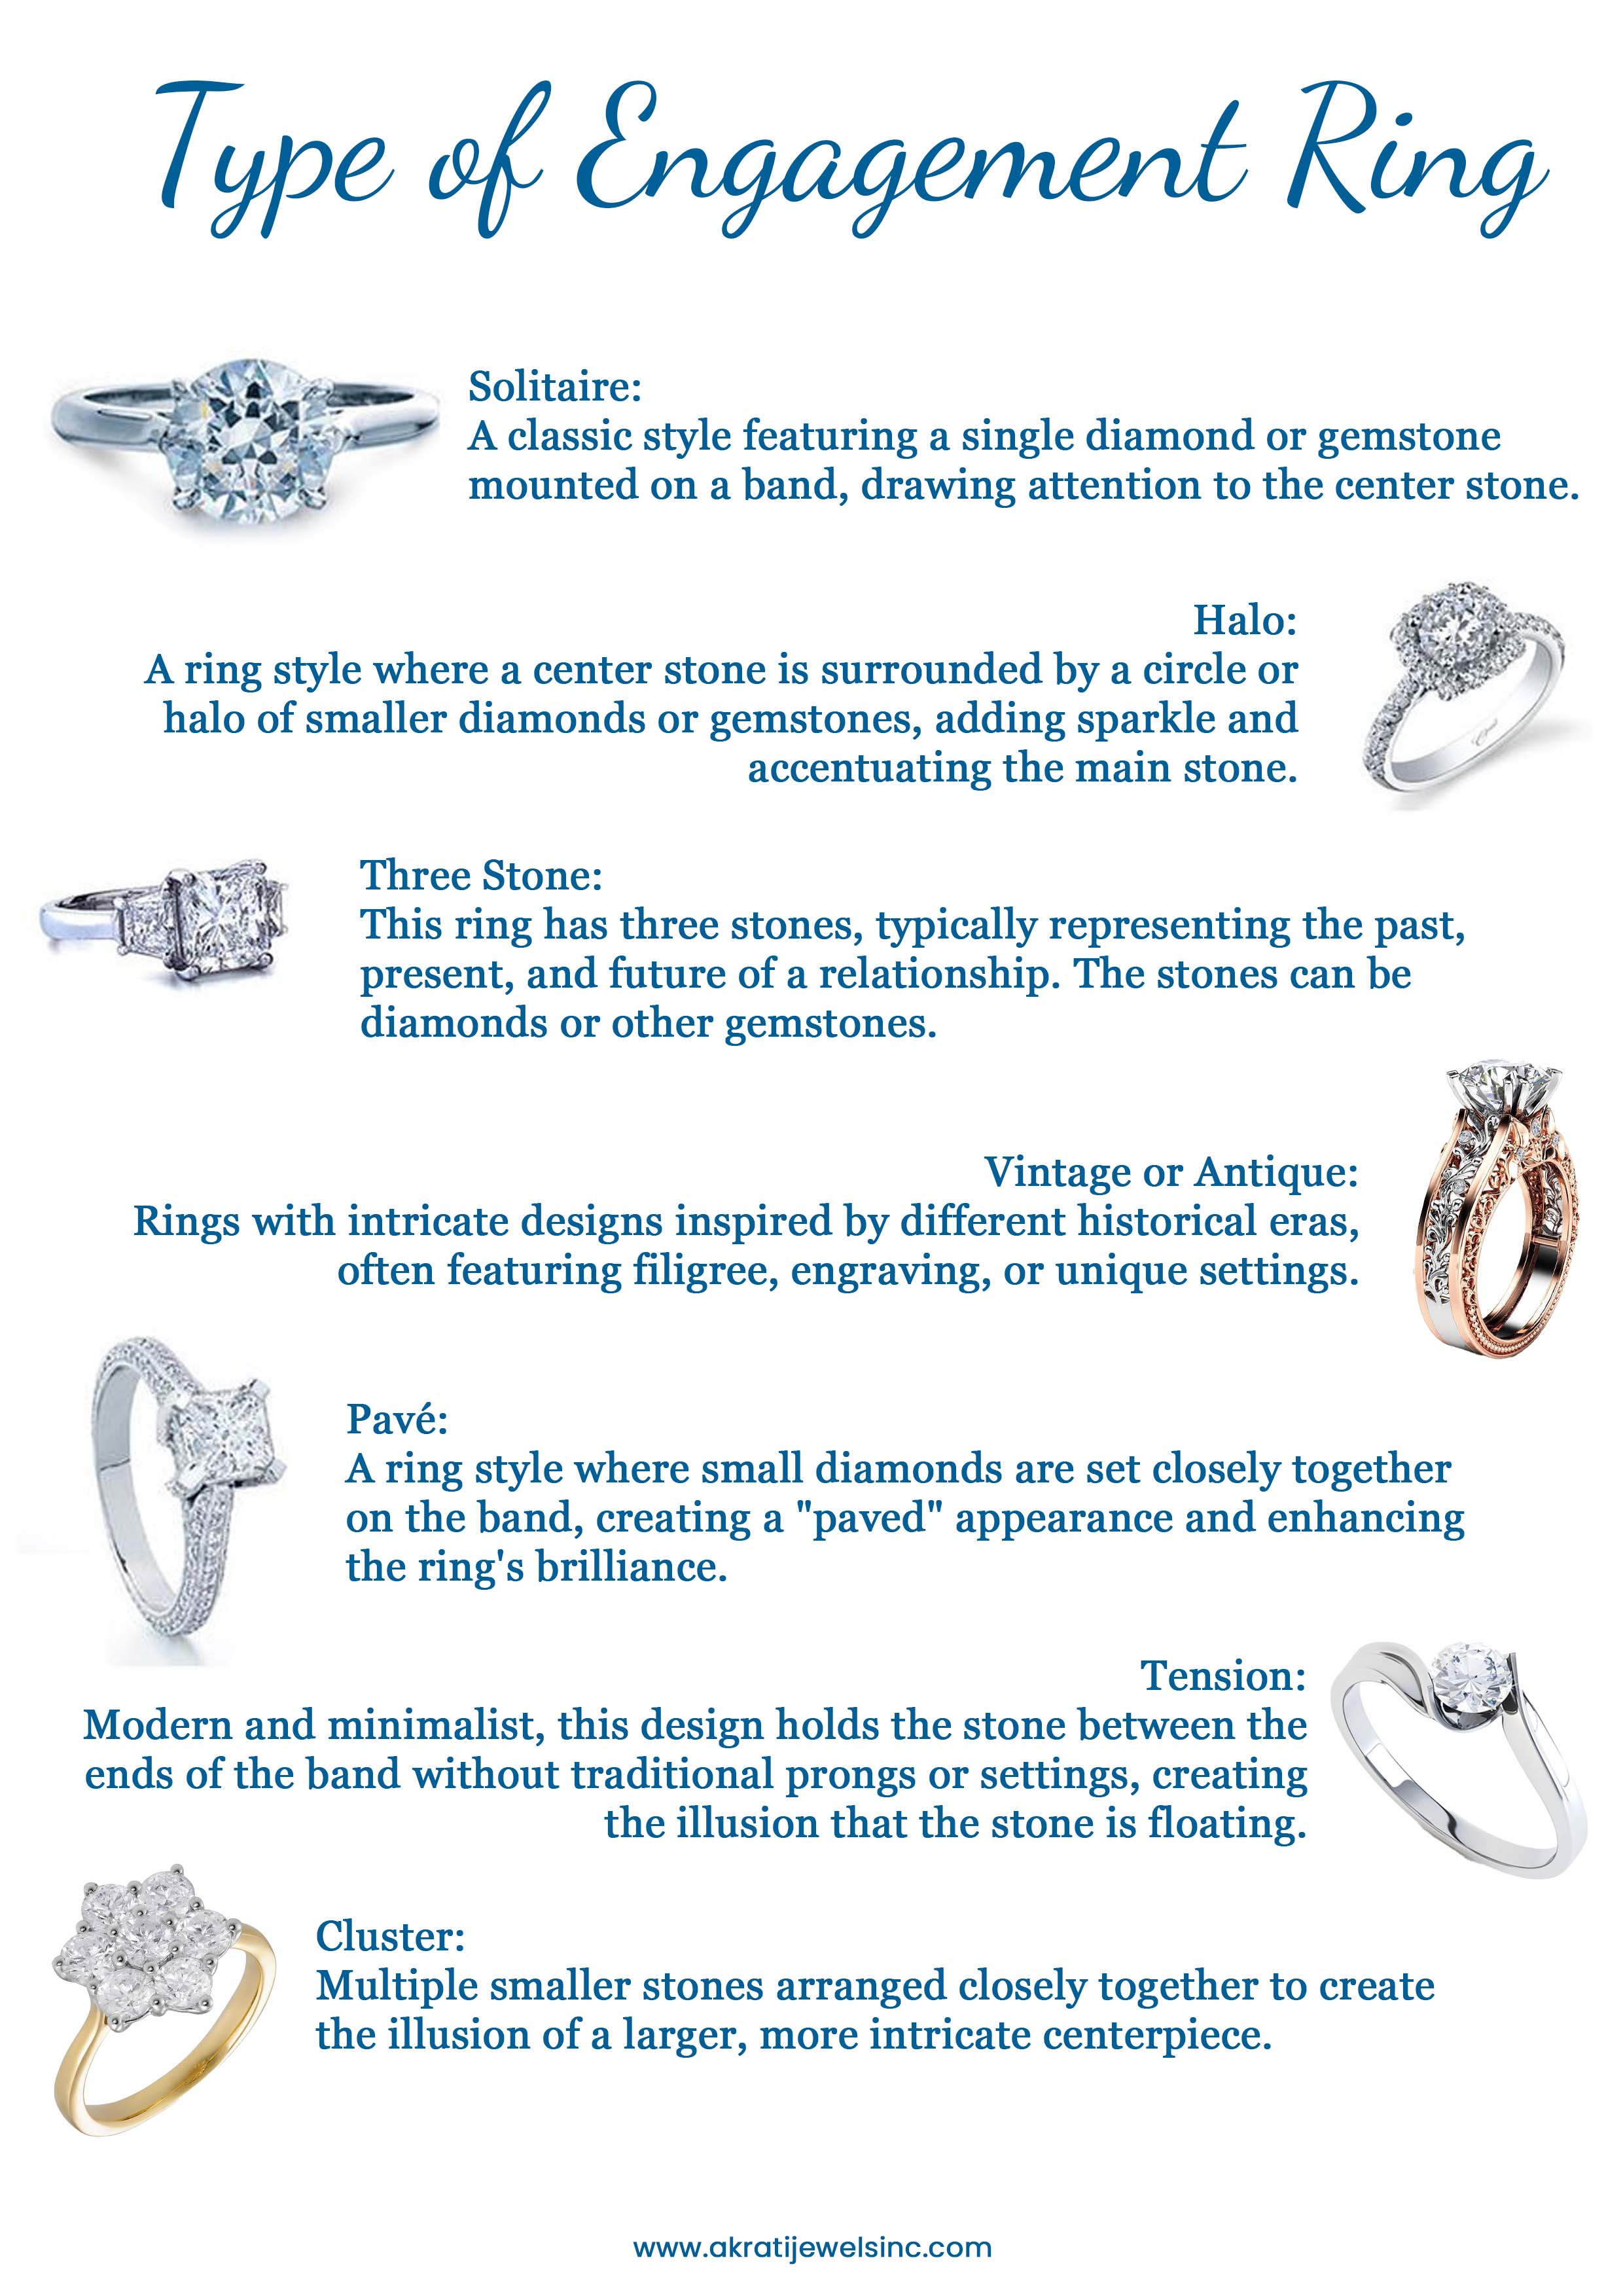 (ype of Engagement Ring

7 — Solitaire:
S4=u=¥ A classic style featuring a single diamond or gemstone

  
 

Halo:

A ring style where a center stone is surrounded by a circle or
halo of smaller diamonds or gemstones, adding sparkle and
accentuating the main stone.

 

Three Stone:

This ring has three stones, typically representing the past,
present, and future of a relationship. The stones can be
diamonds or other gemstones.

 

Vintage or Antique:
Rings with intricate designs inspired by different historical eras,
often featuring filigree, engraving, or unique settings.

 

Pavé:

A ring style where small diamonds are set closely together
on the band, creating a "paved" appearance and enhancing
the ring's brilliance.

 

Tension: N a

Modern and minimalist, this design holds the stone between the
ends of the band without traditional prongs or settings, creating

the illusion that the stone is floating. \

 

Hane a )
“gee? Cluster:

J) Multiple smaller stones arranged closely together to create
the illusion of a larger, more intricate centerpiece.

  

www.akratijewelsinc.com